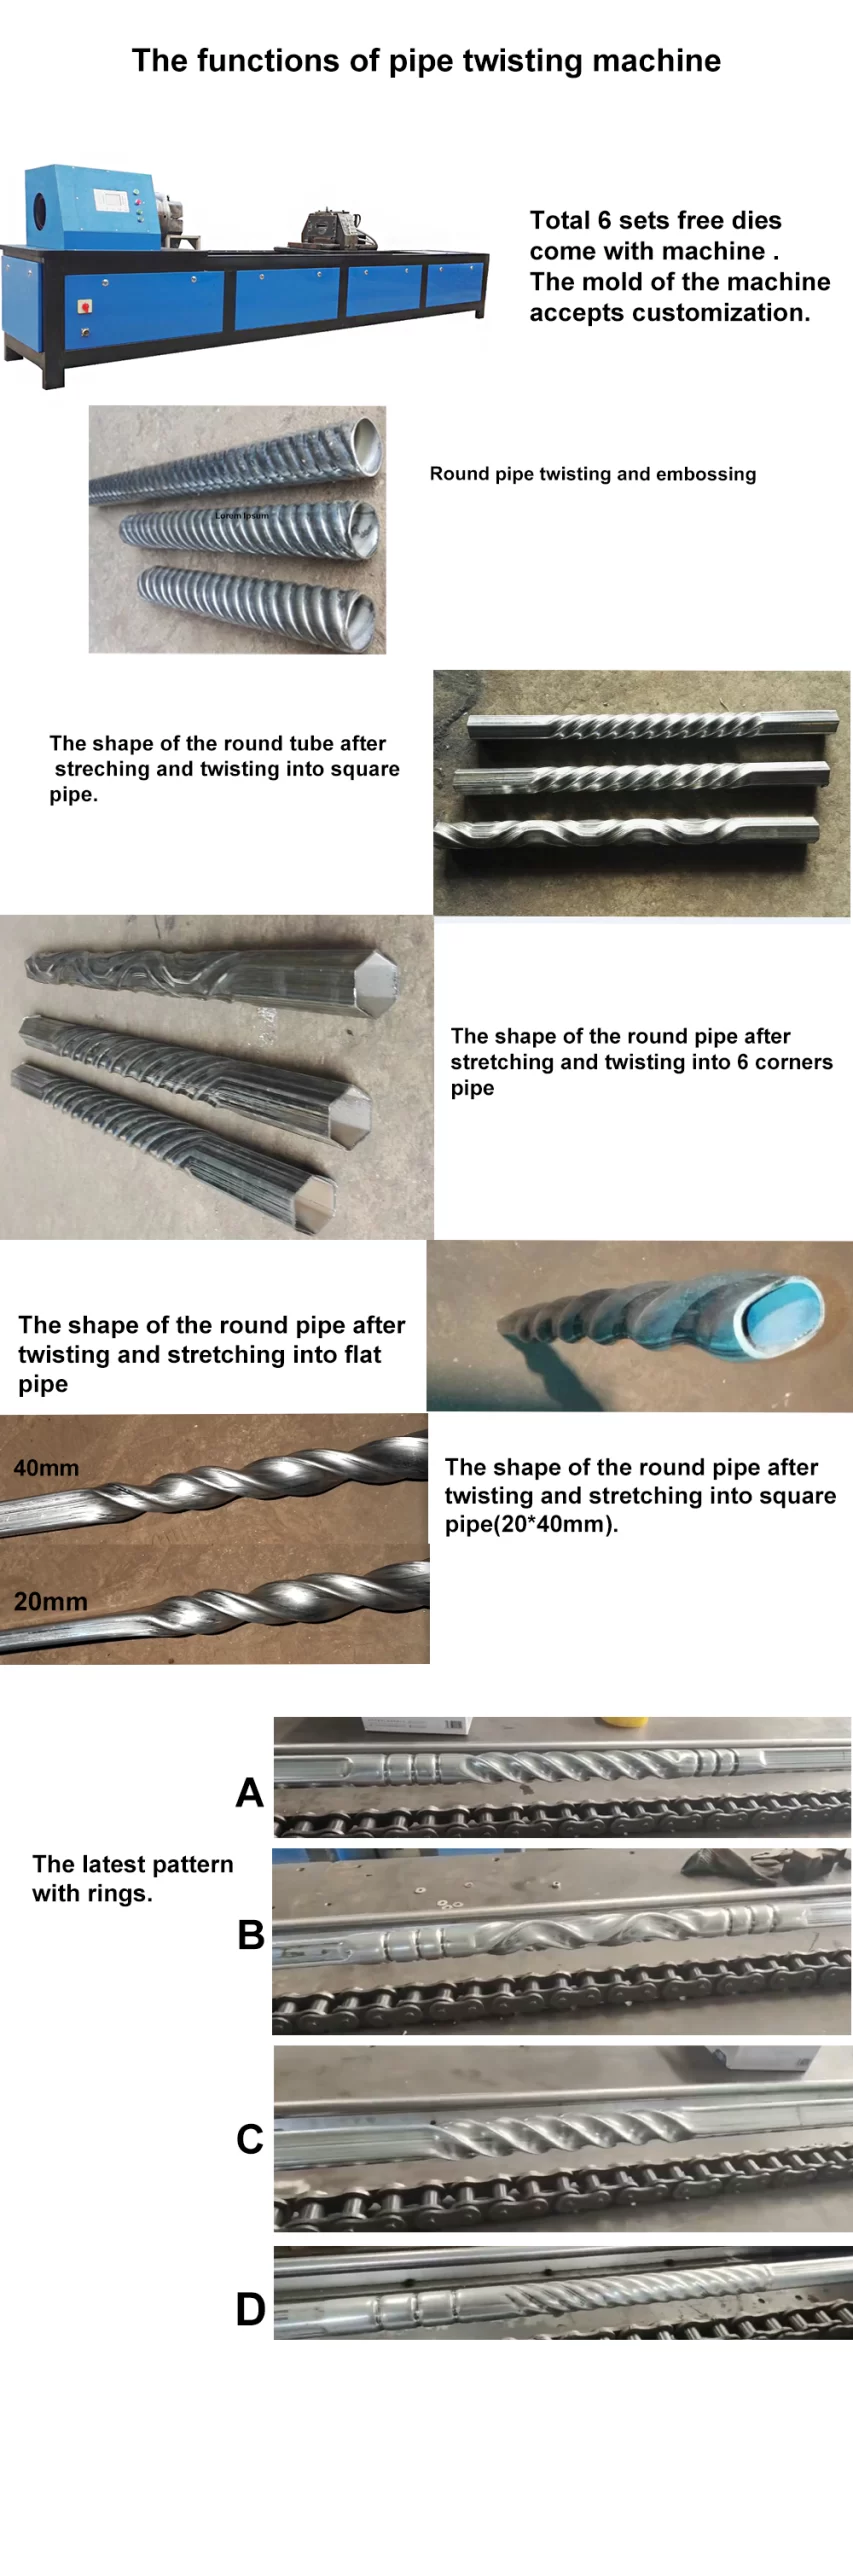 Finished products by pipe twisting machine 